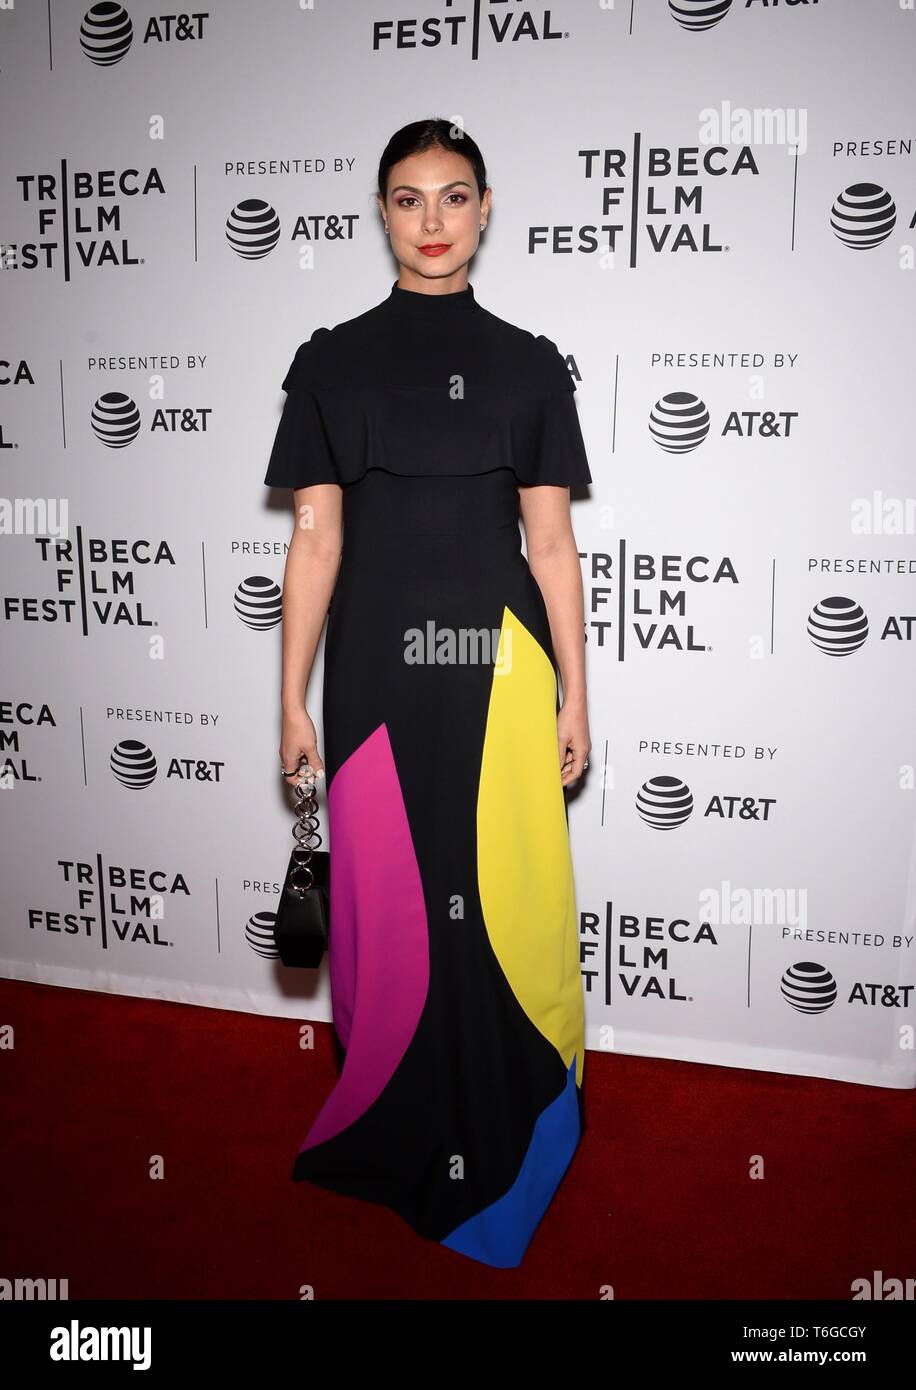 New York, NY, USA. 30th Apr, 2019. Morena Baccarin at arrivals for FRAMING JOHN DELOREAN Premiere at the Tribeca Film Festival, Crosby Street Hotel, New York, NY April 30, 2019. Credit: Eli Winston/Everett Collection/Alamy Live News Stock Photo